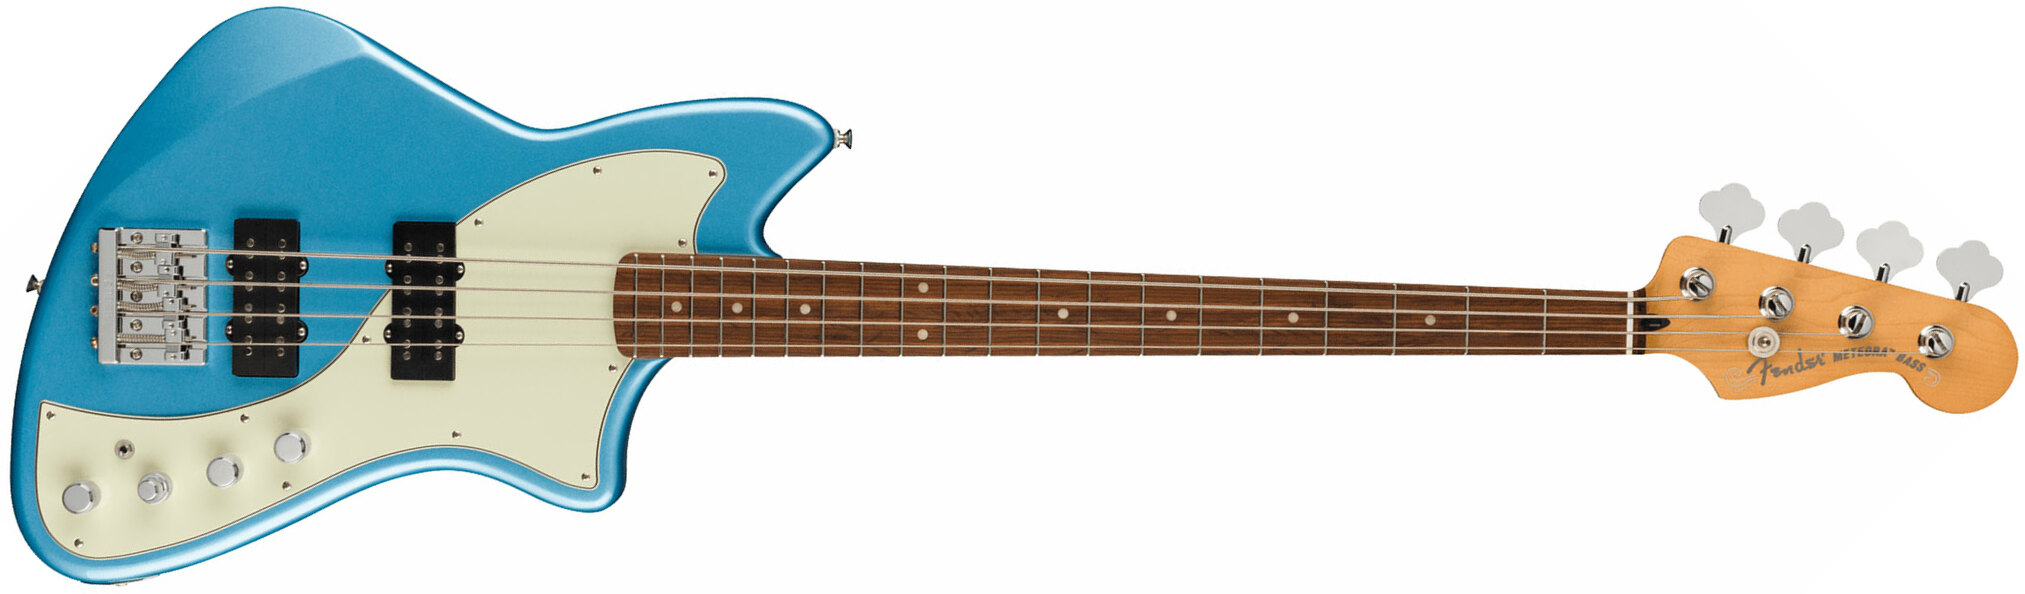 Fender Meteora Bass Active Player Plus Mex Pf - Opal Spark - Solidbody E-bass - Main picture